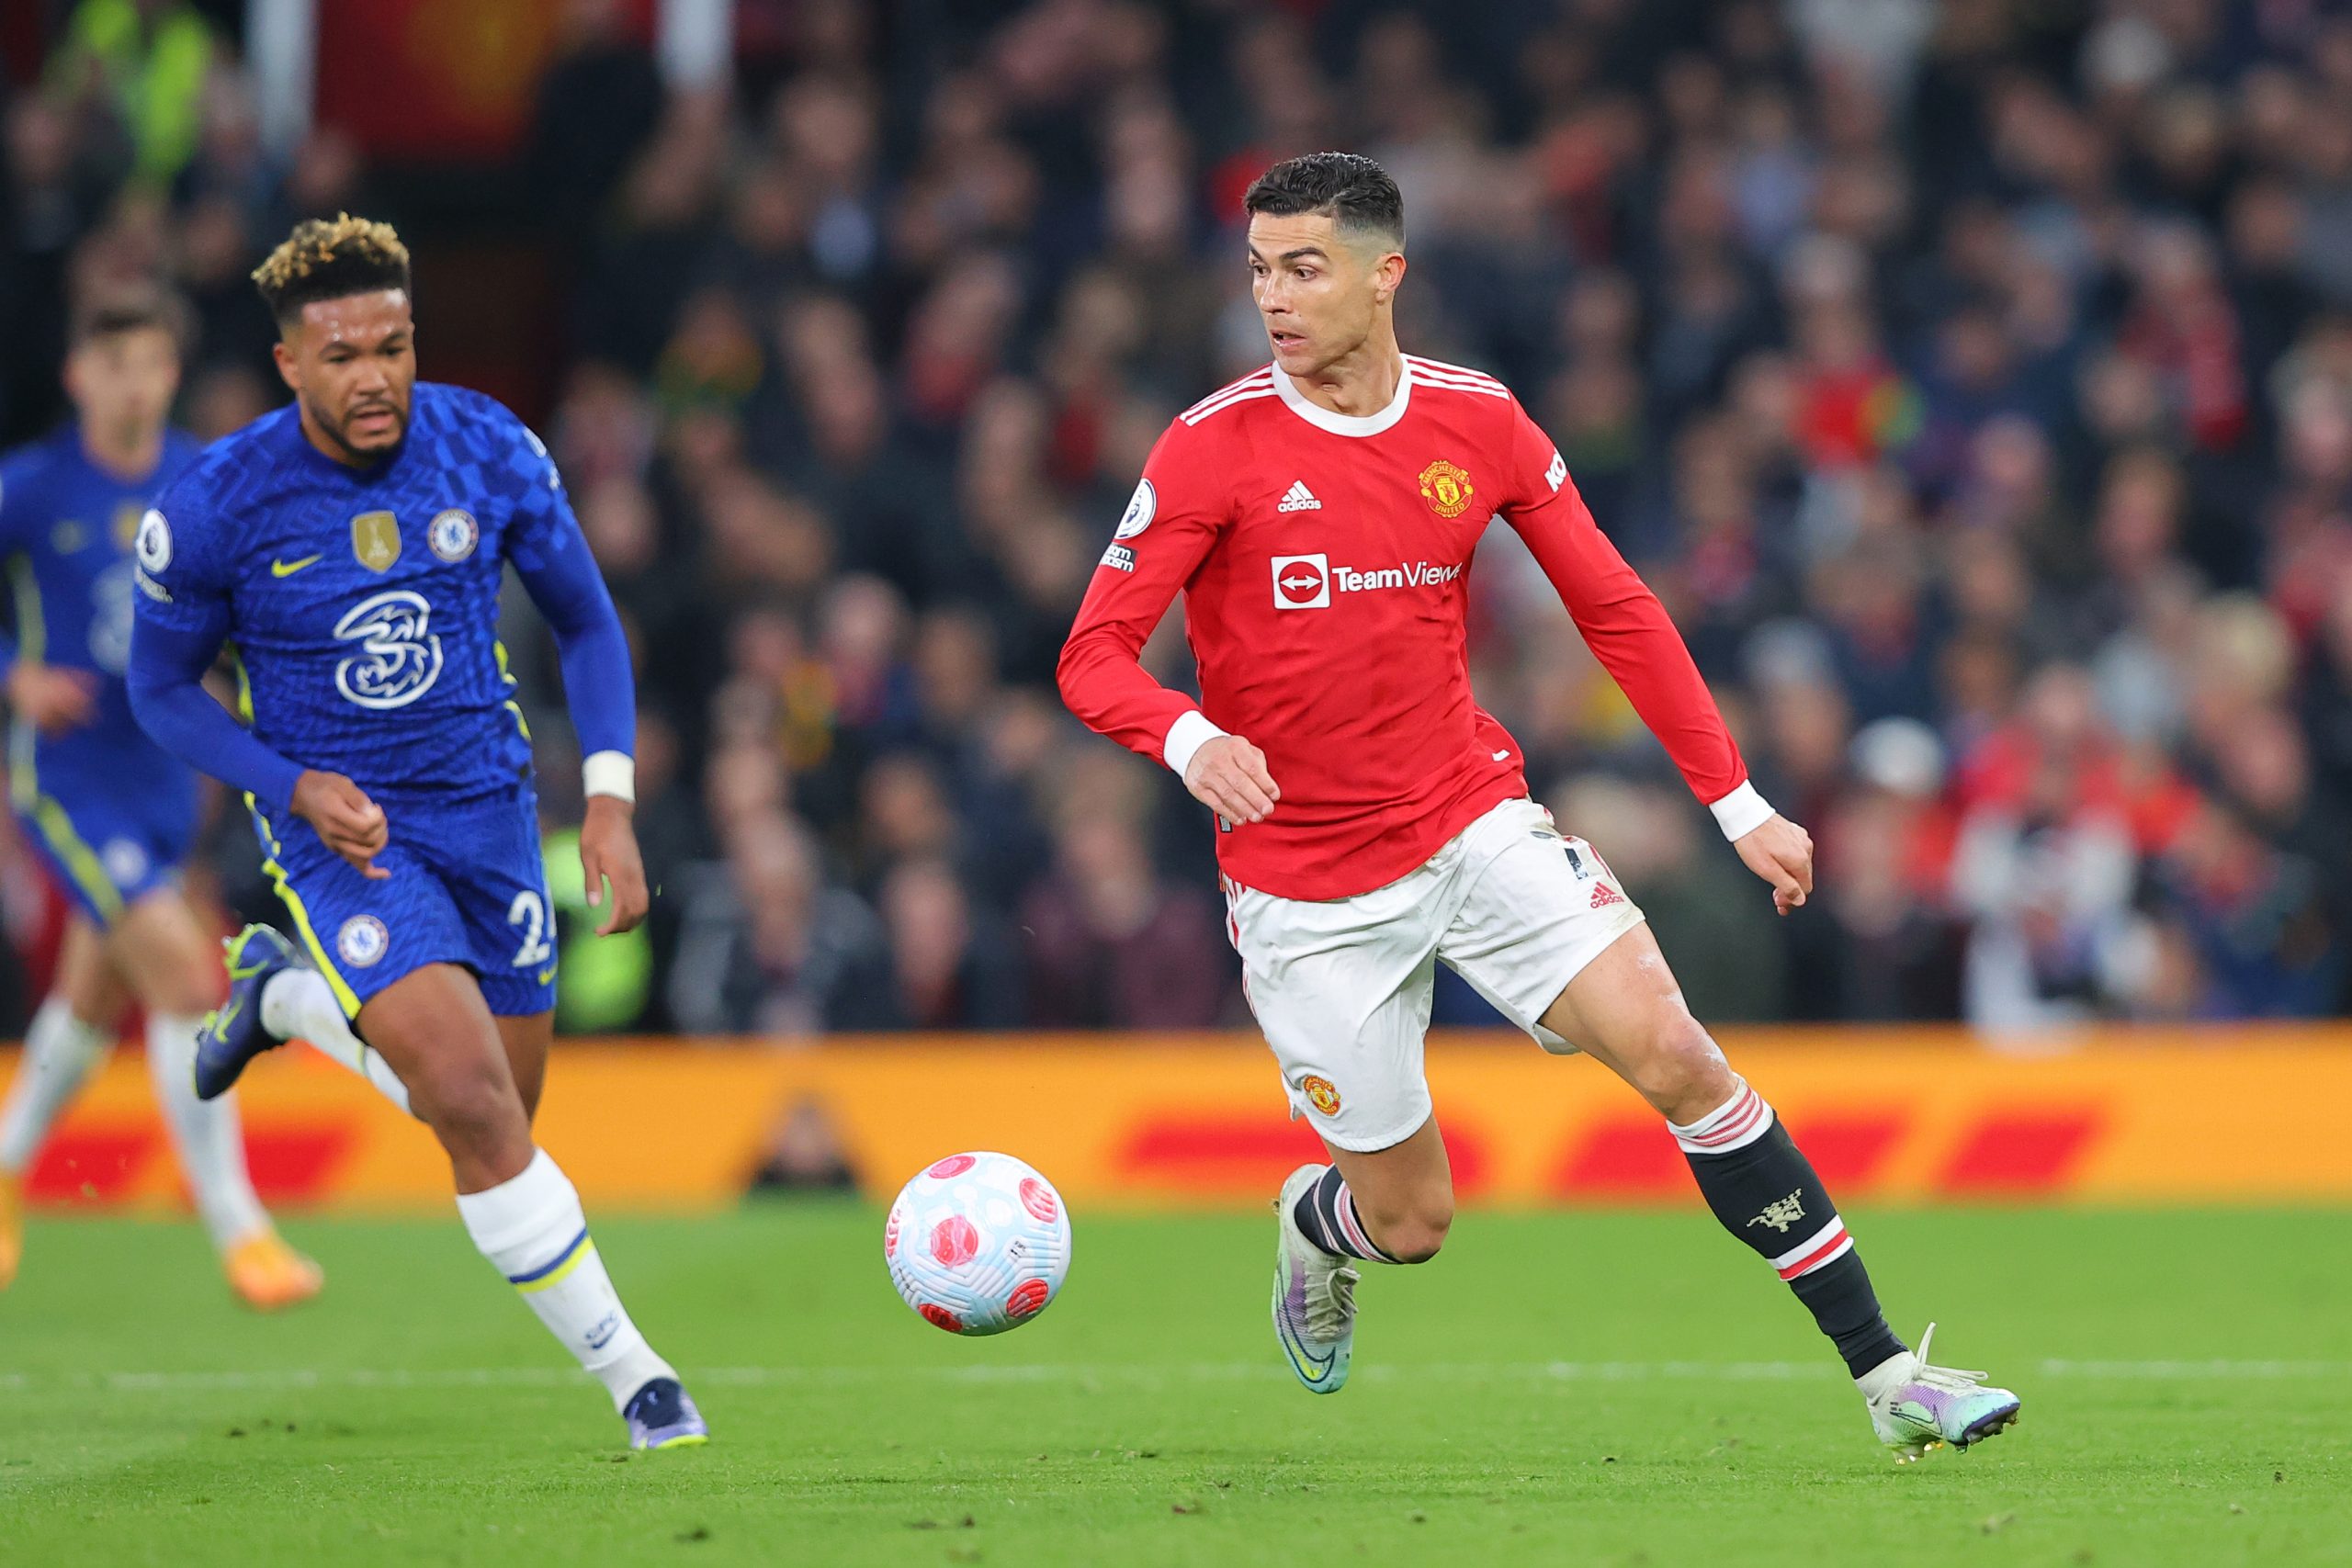 Cristiano Ronaldo of Manchester United runs with the ball from Reece James of Chelsea.